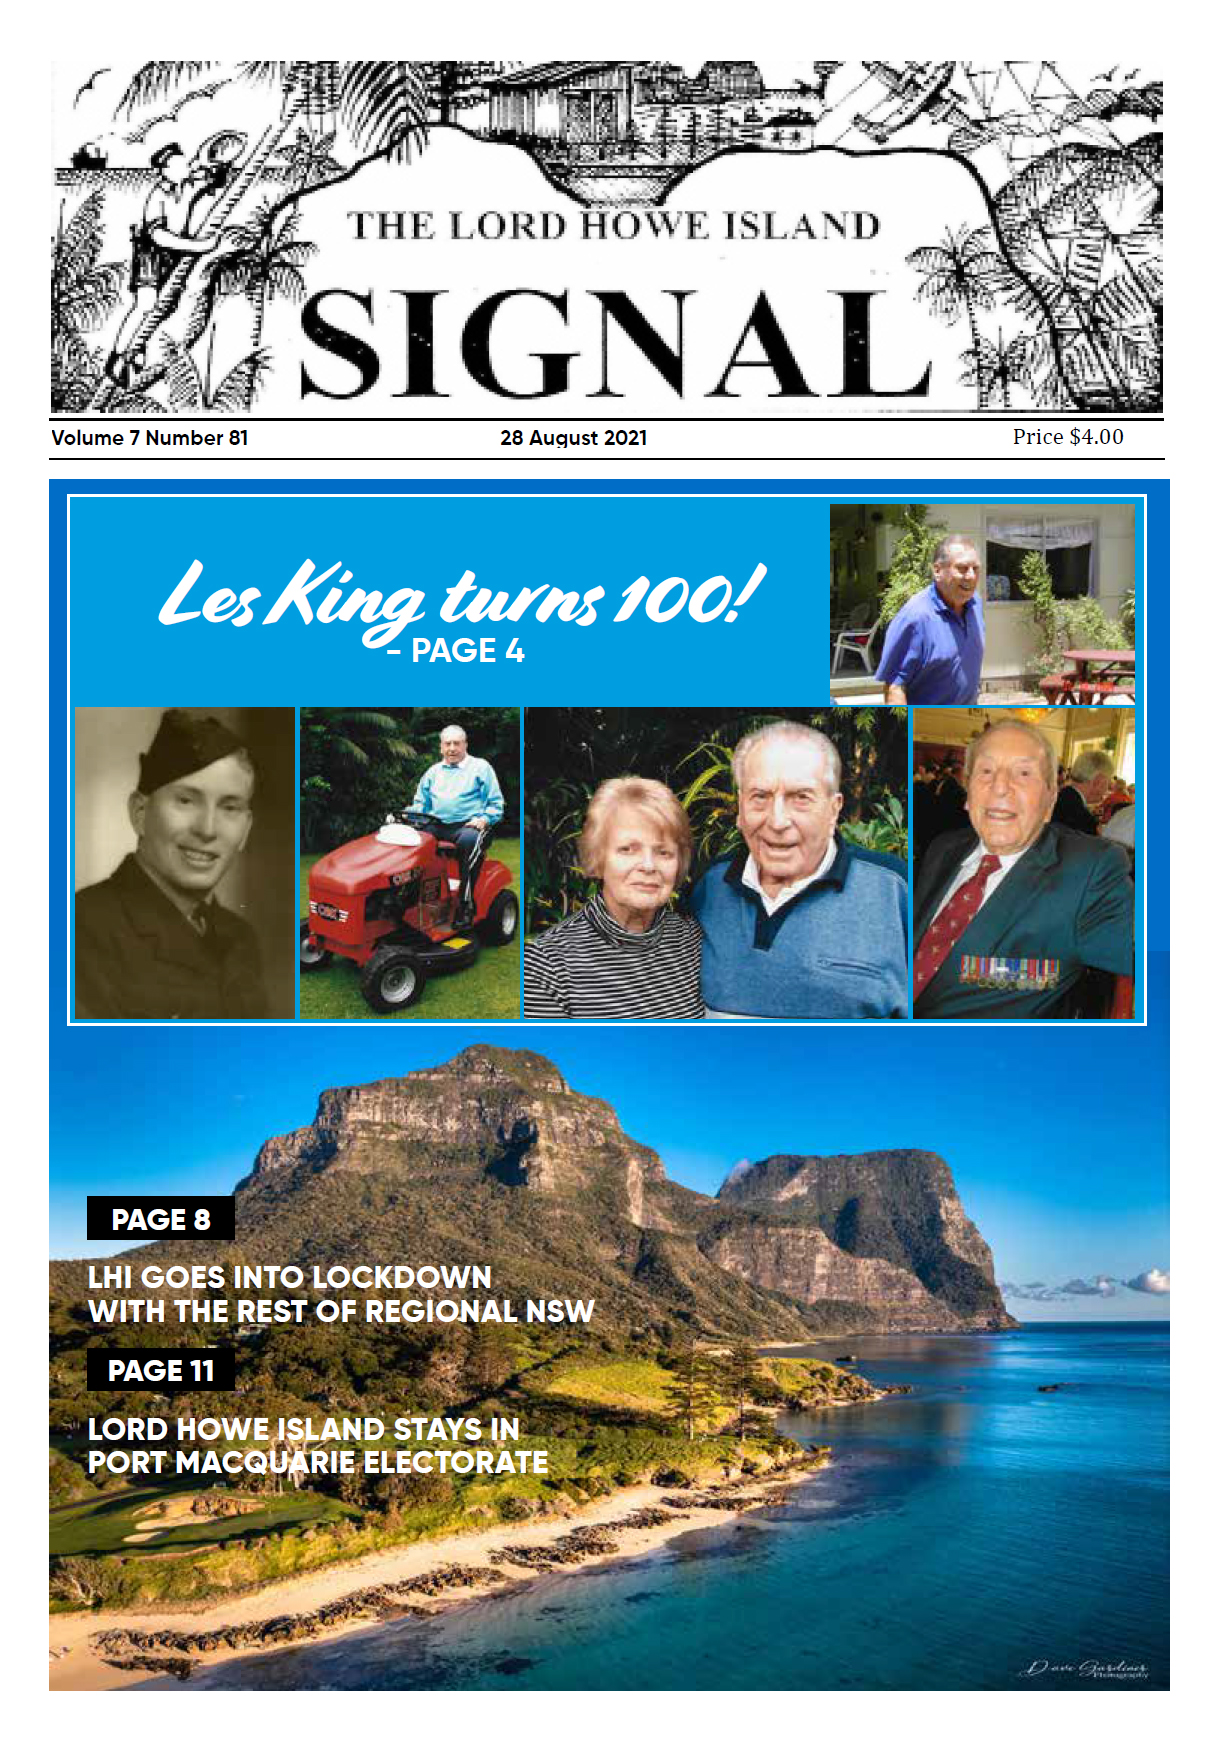 The Lord Howe Island Signal 28 August 2021